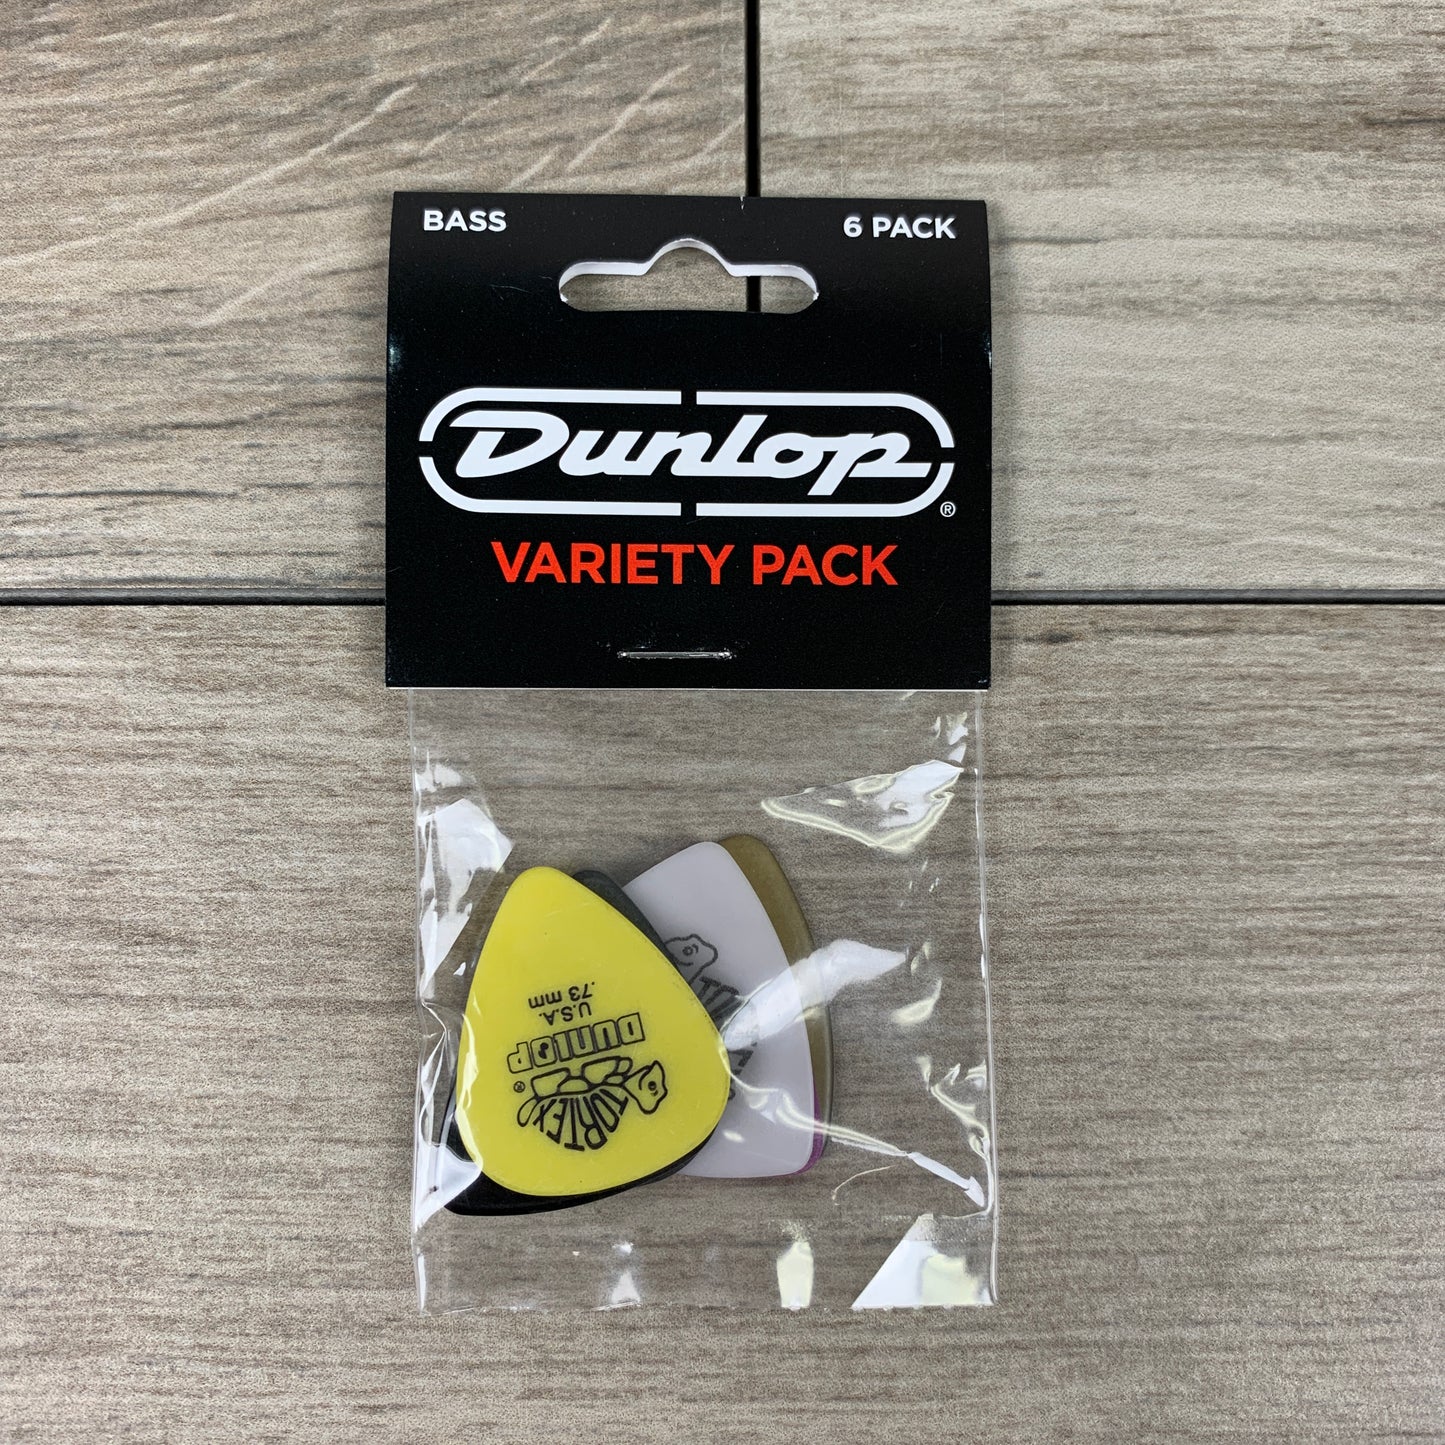 Products - Guitar Picks - Page 1 - Dunlop